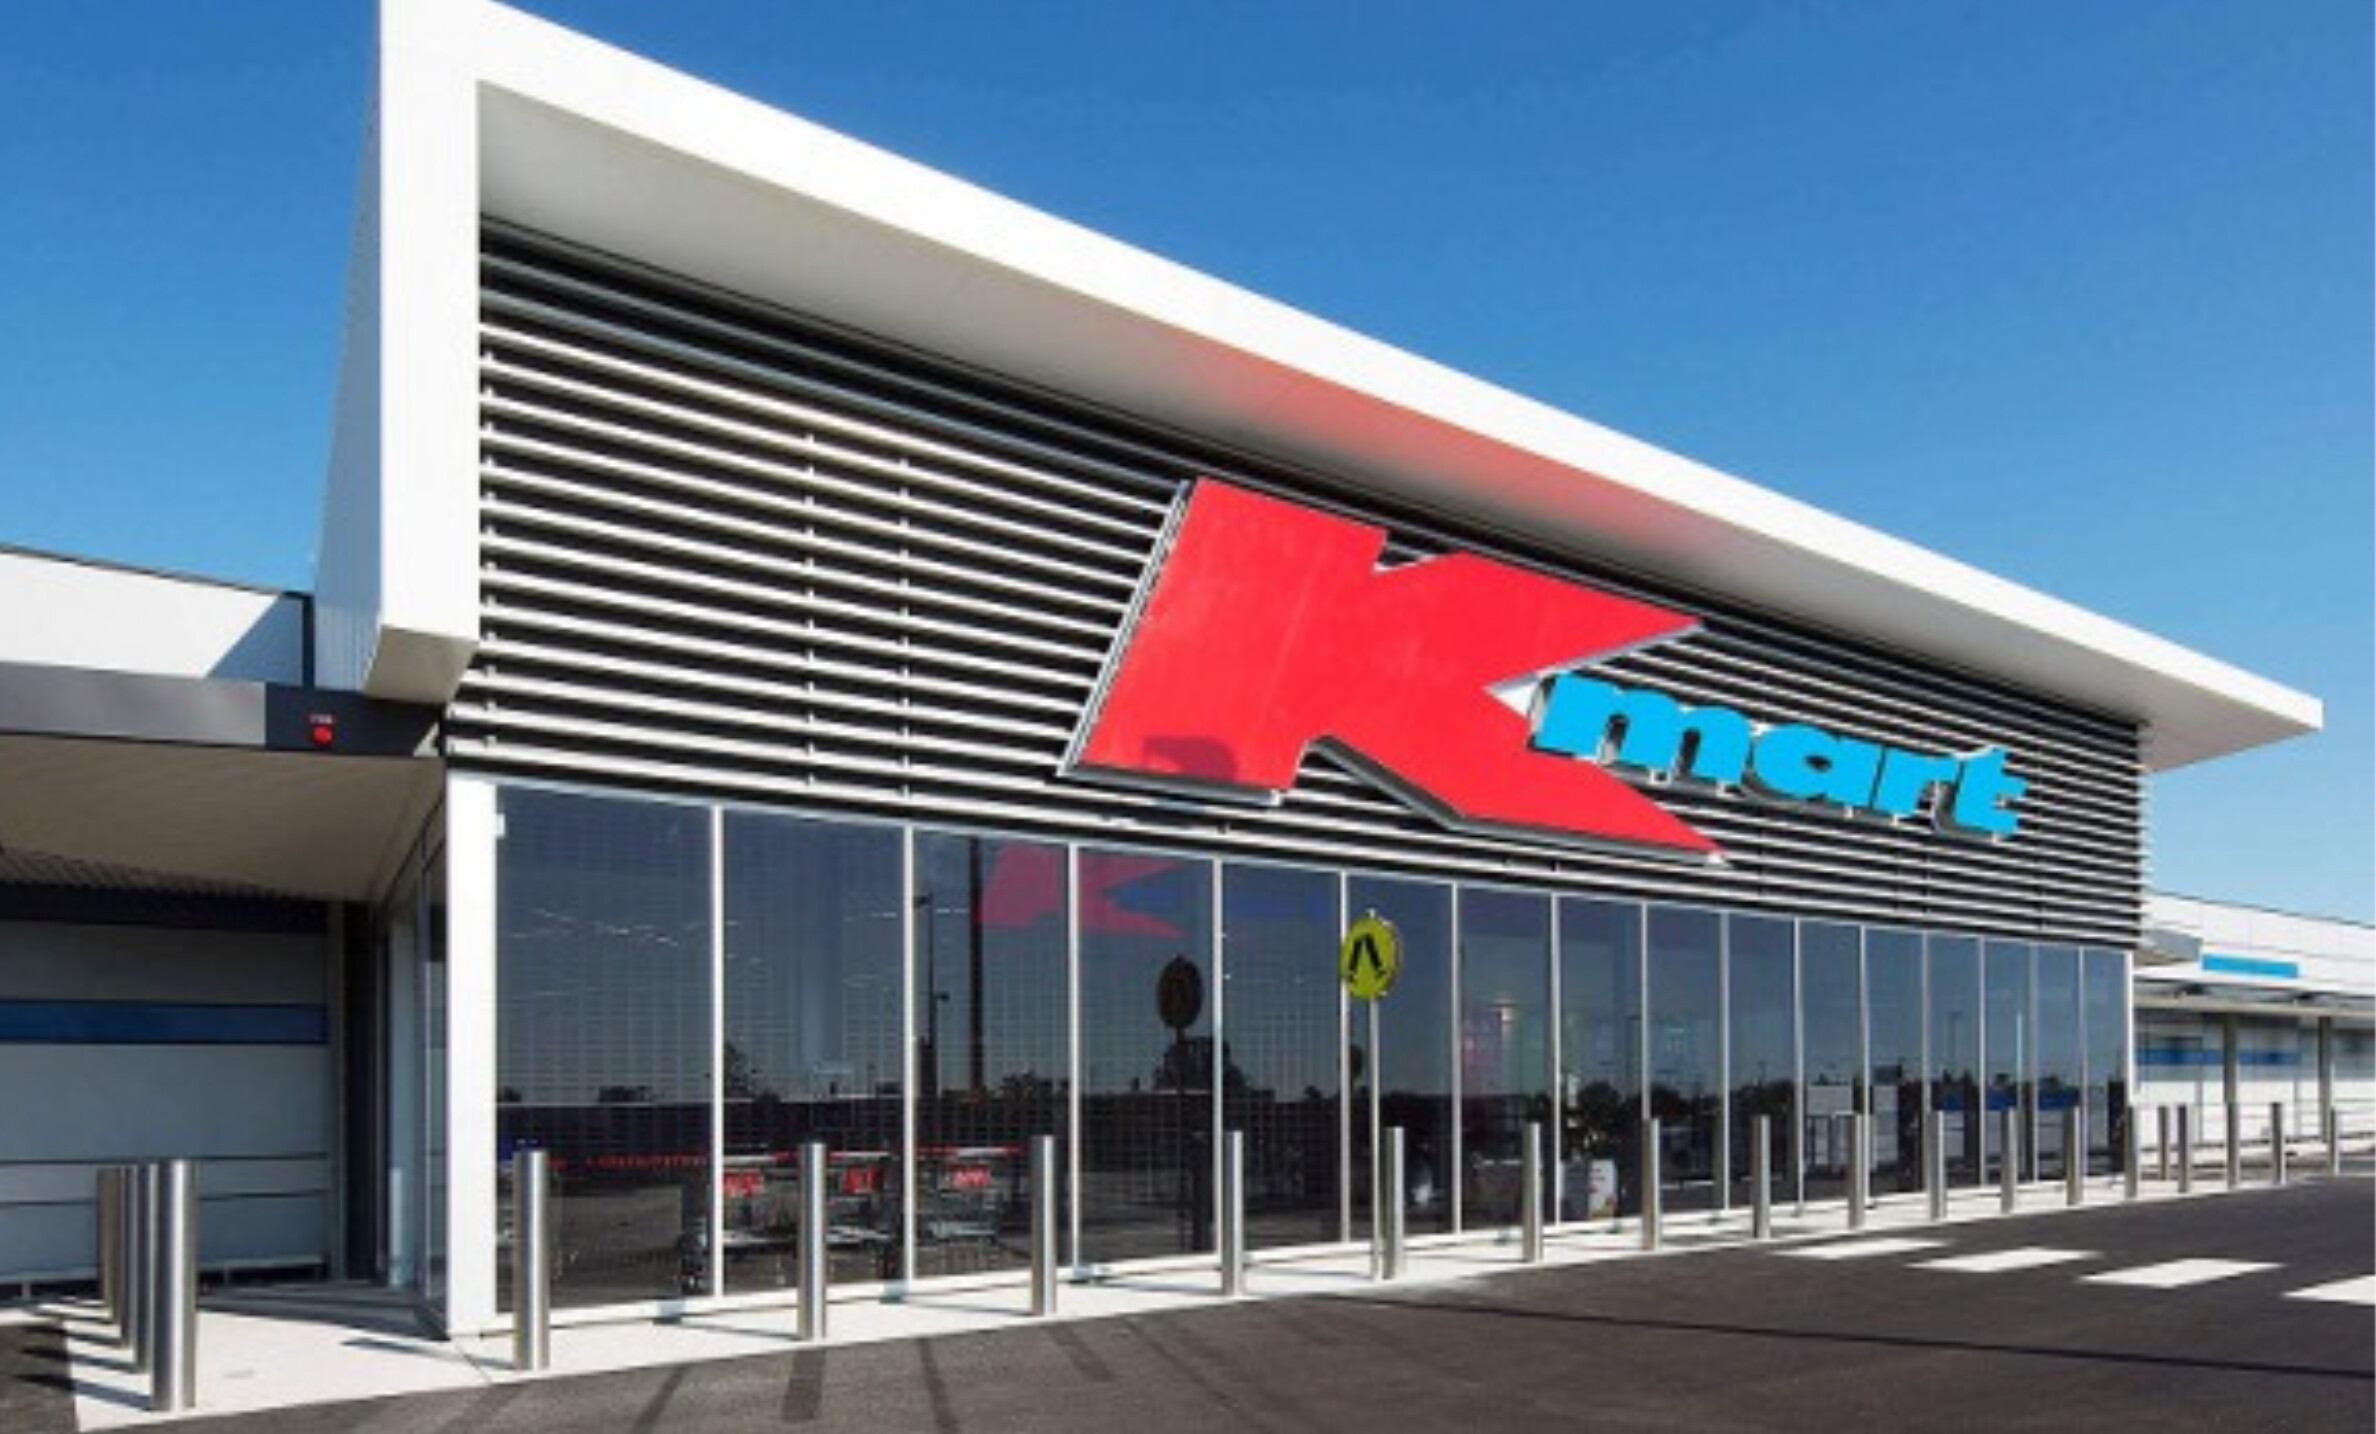 Kmart opts for commercetools' MACH approach to modern commerce